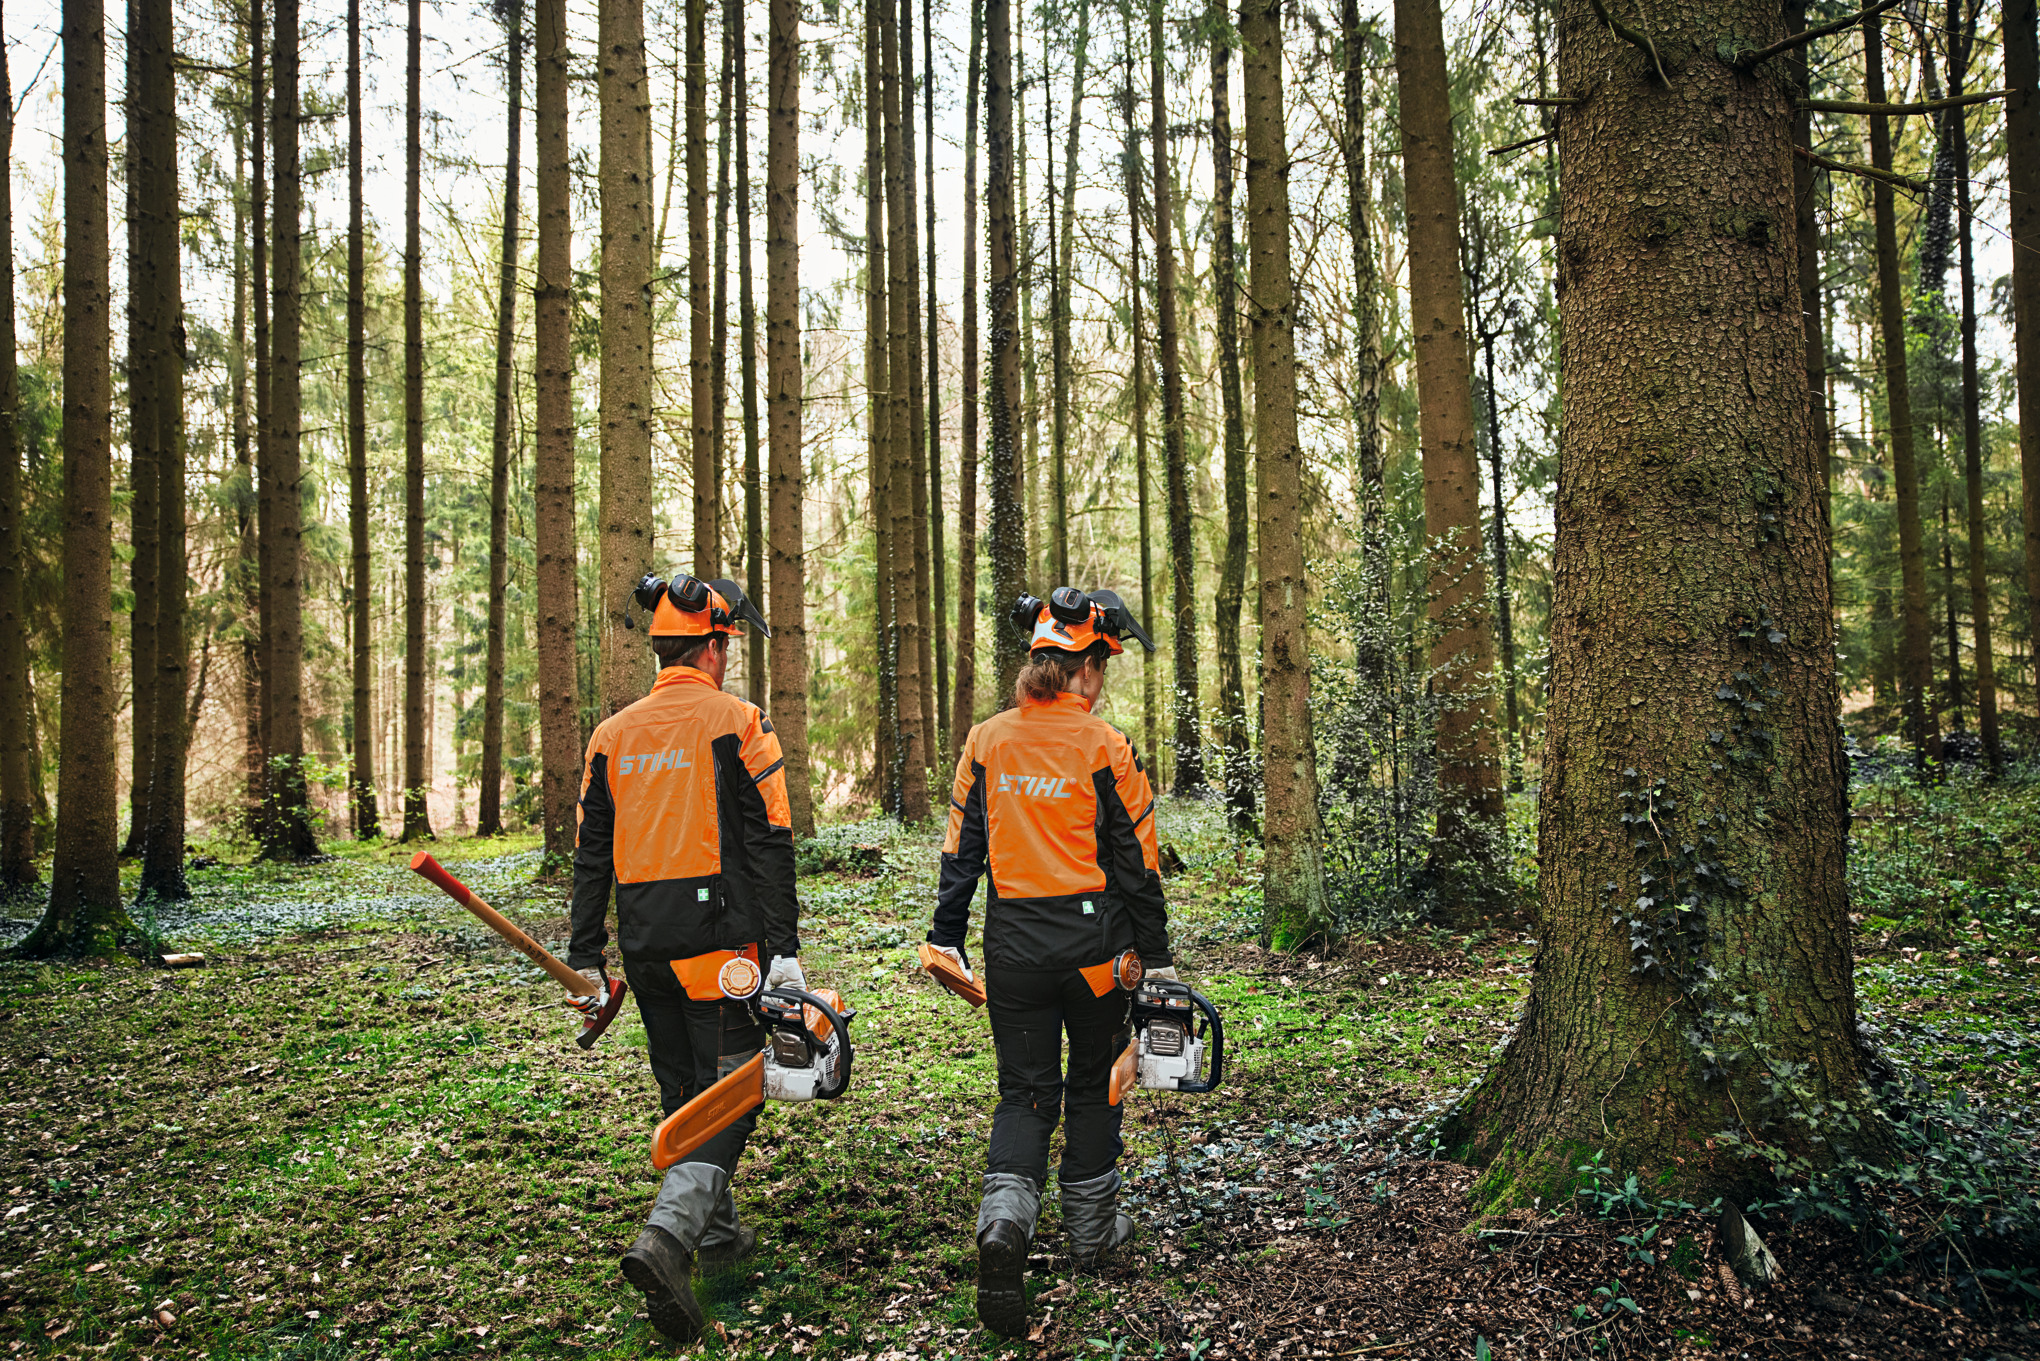 Two people wearing protective equipment in a forest, with chainsaws and axe.